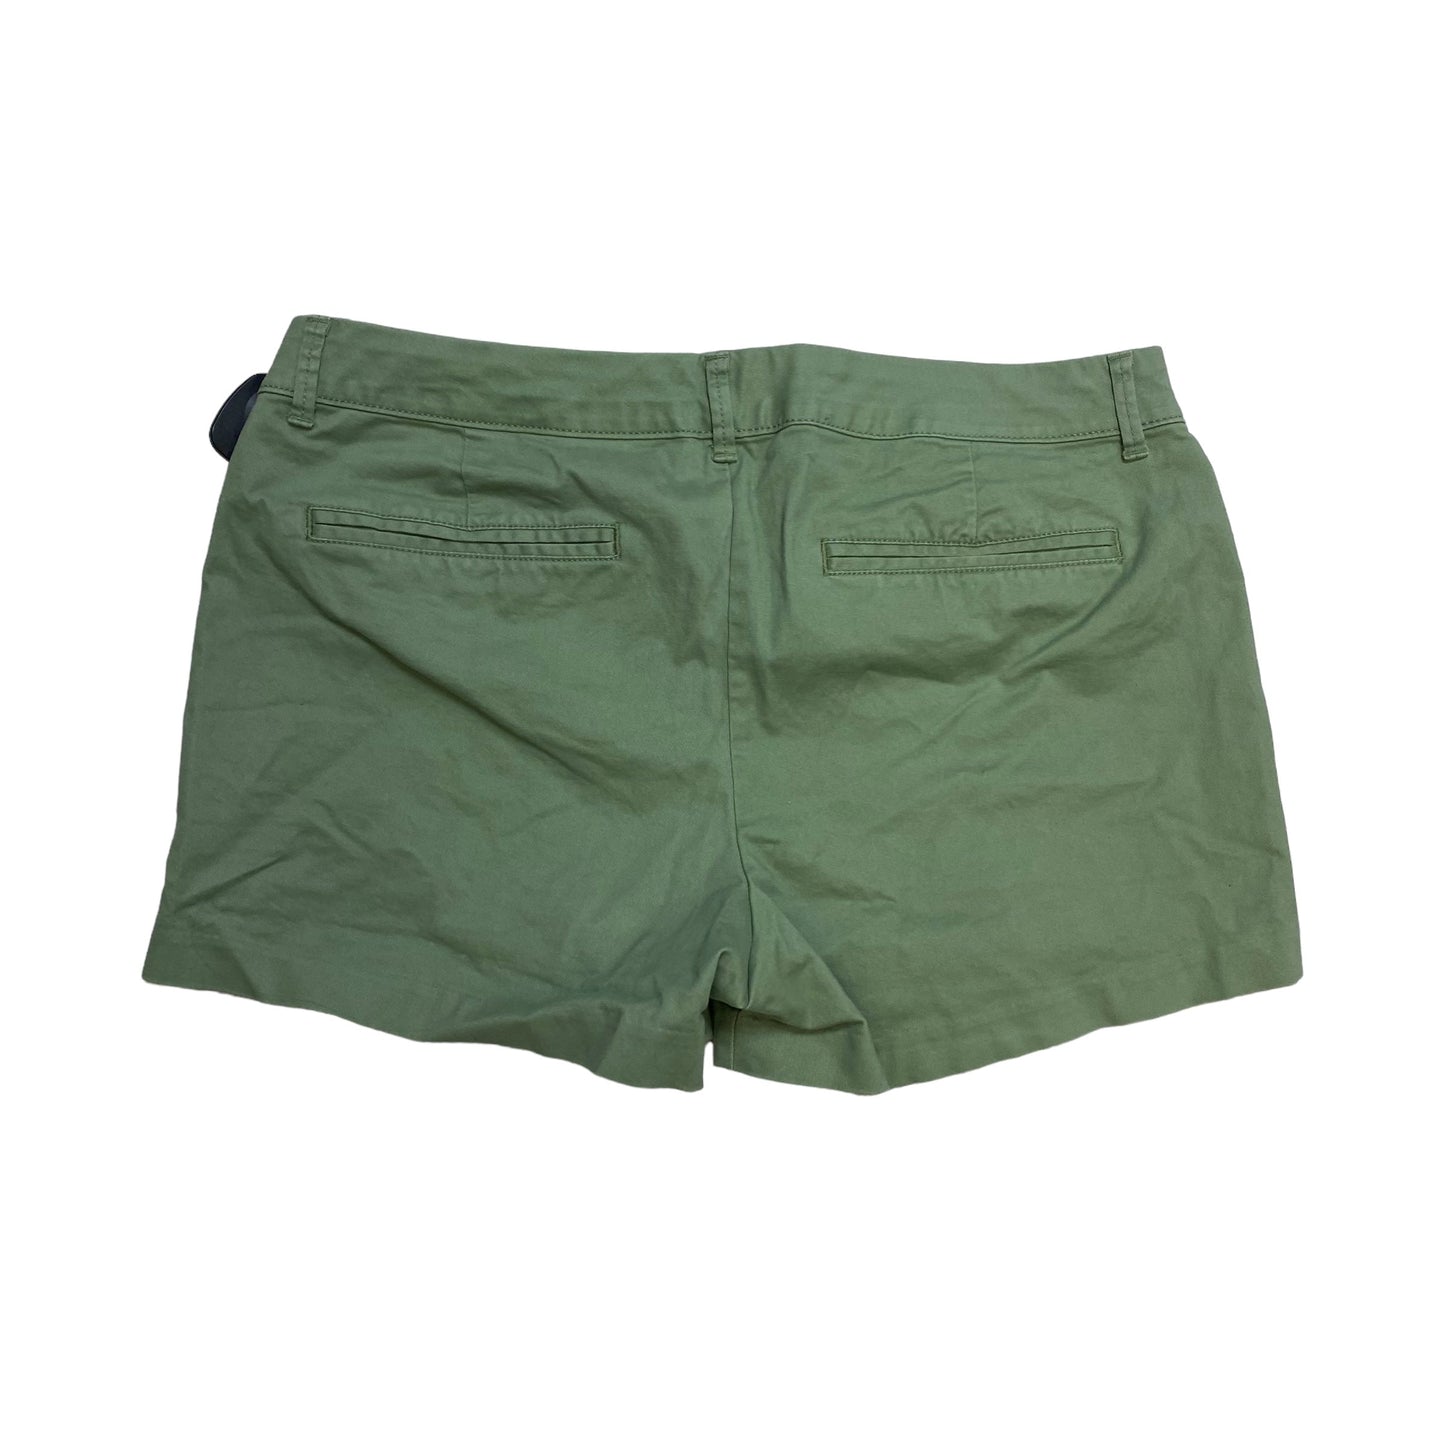 Green Shorts Old Navy, Size 12